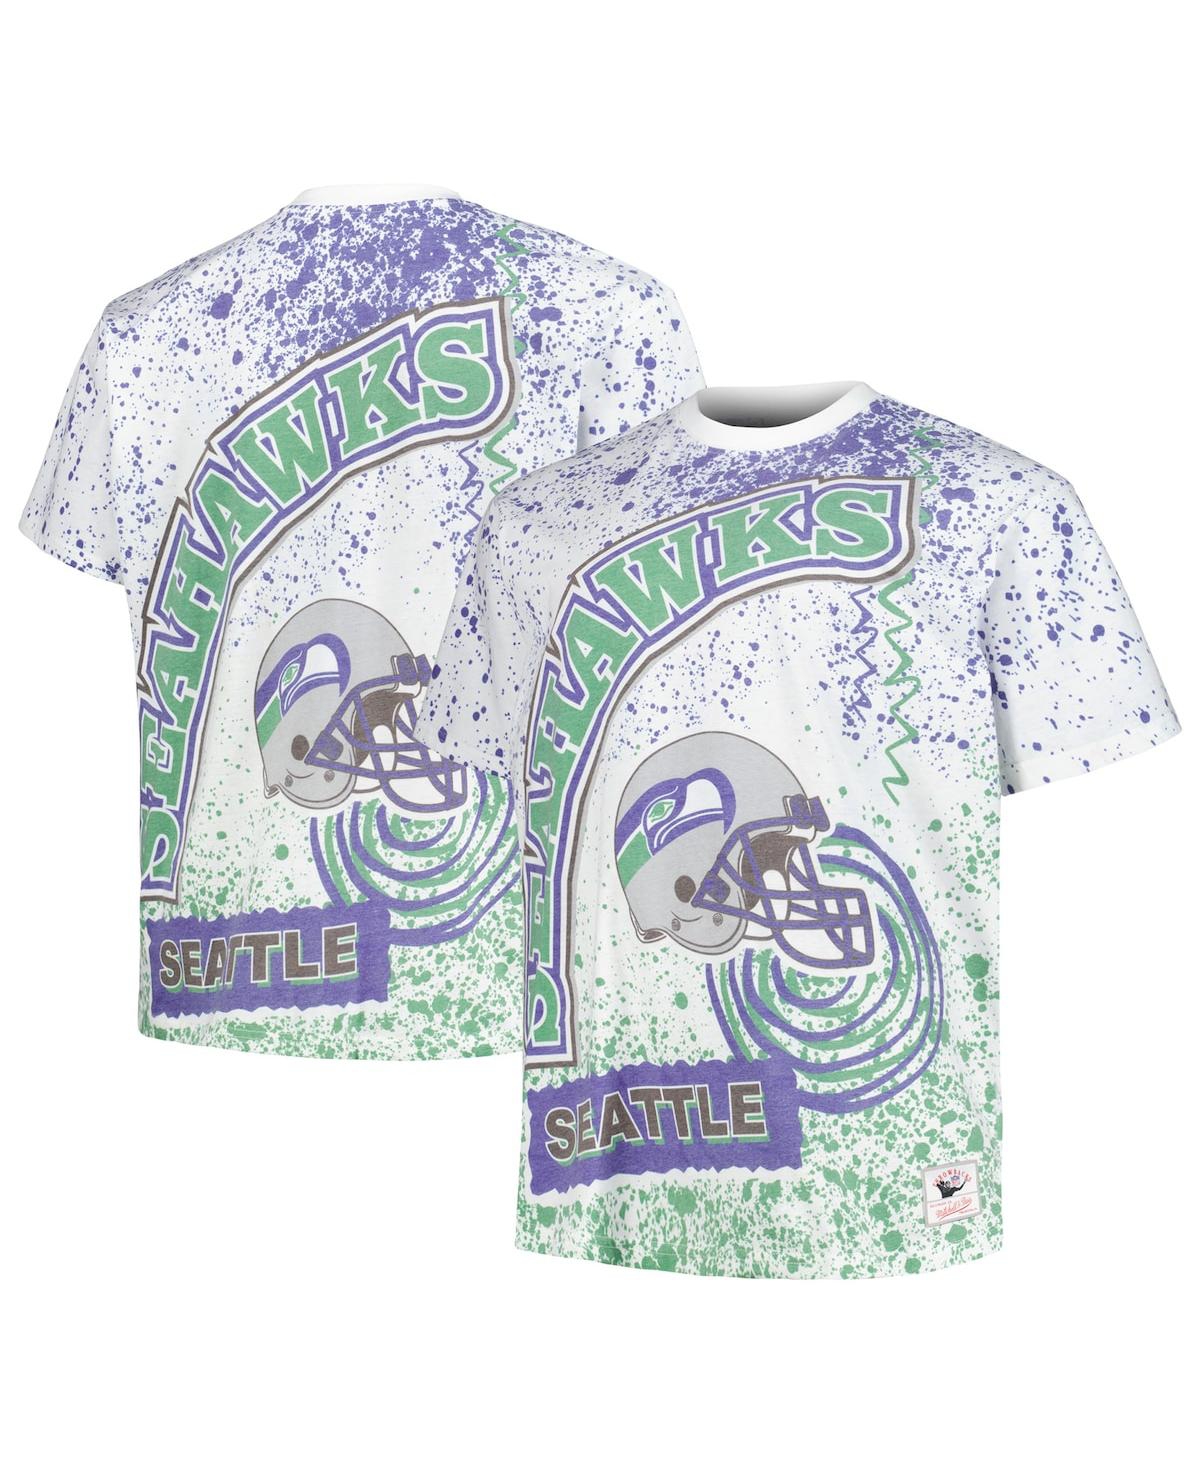 Shop Mitchell & Ness Men's  White Seattle Seahawks Big And Tall Allover Print T-shirt